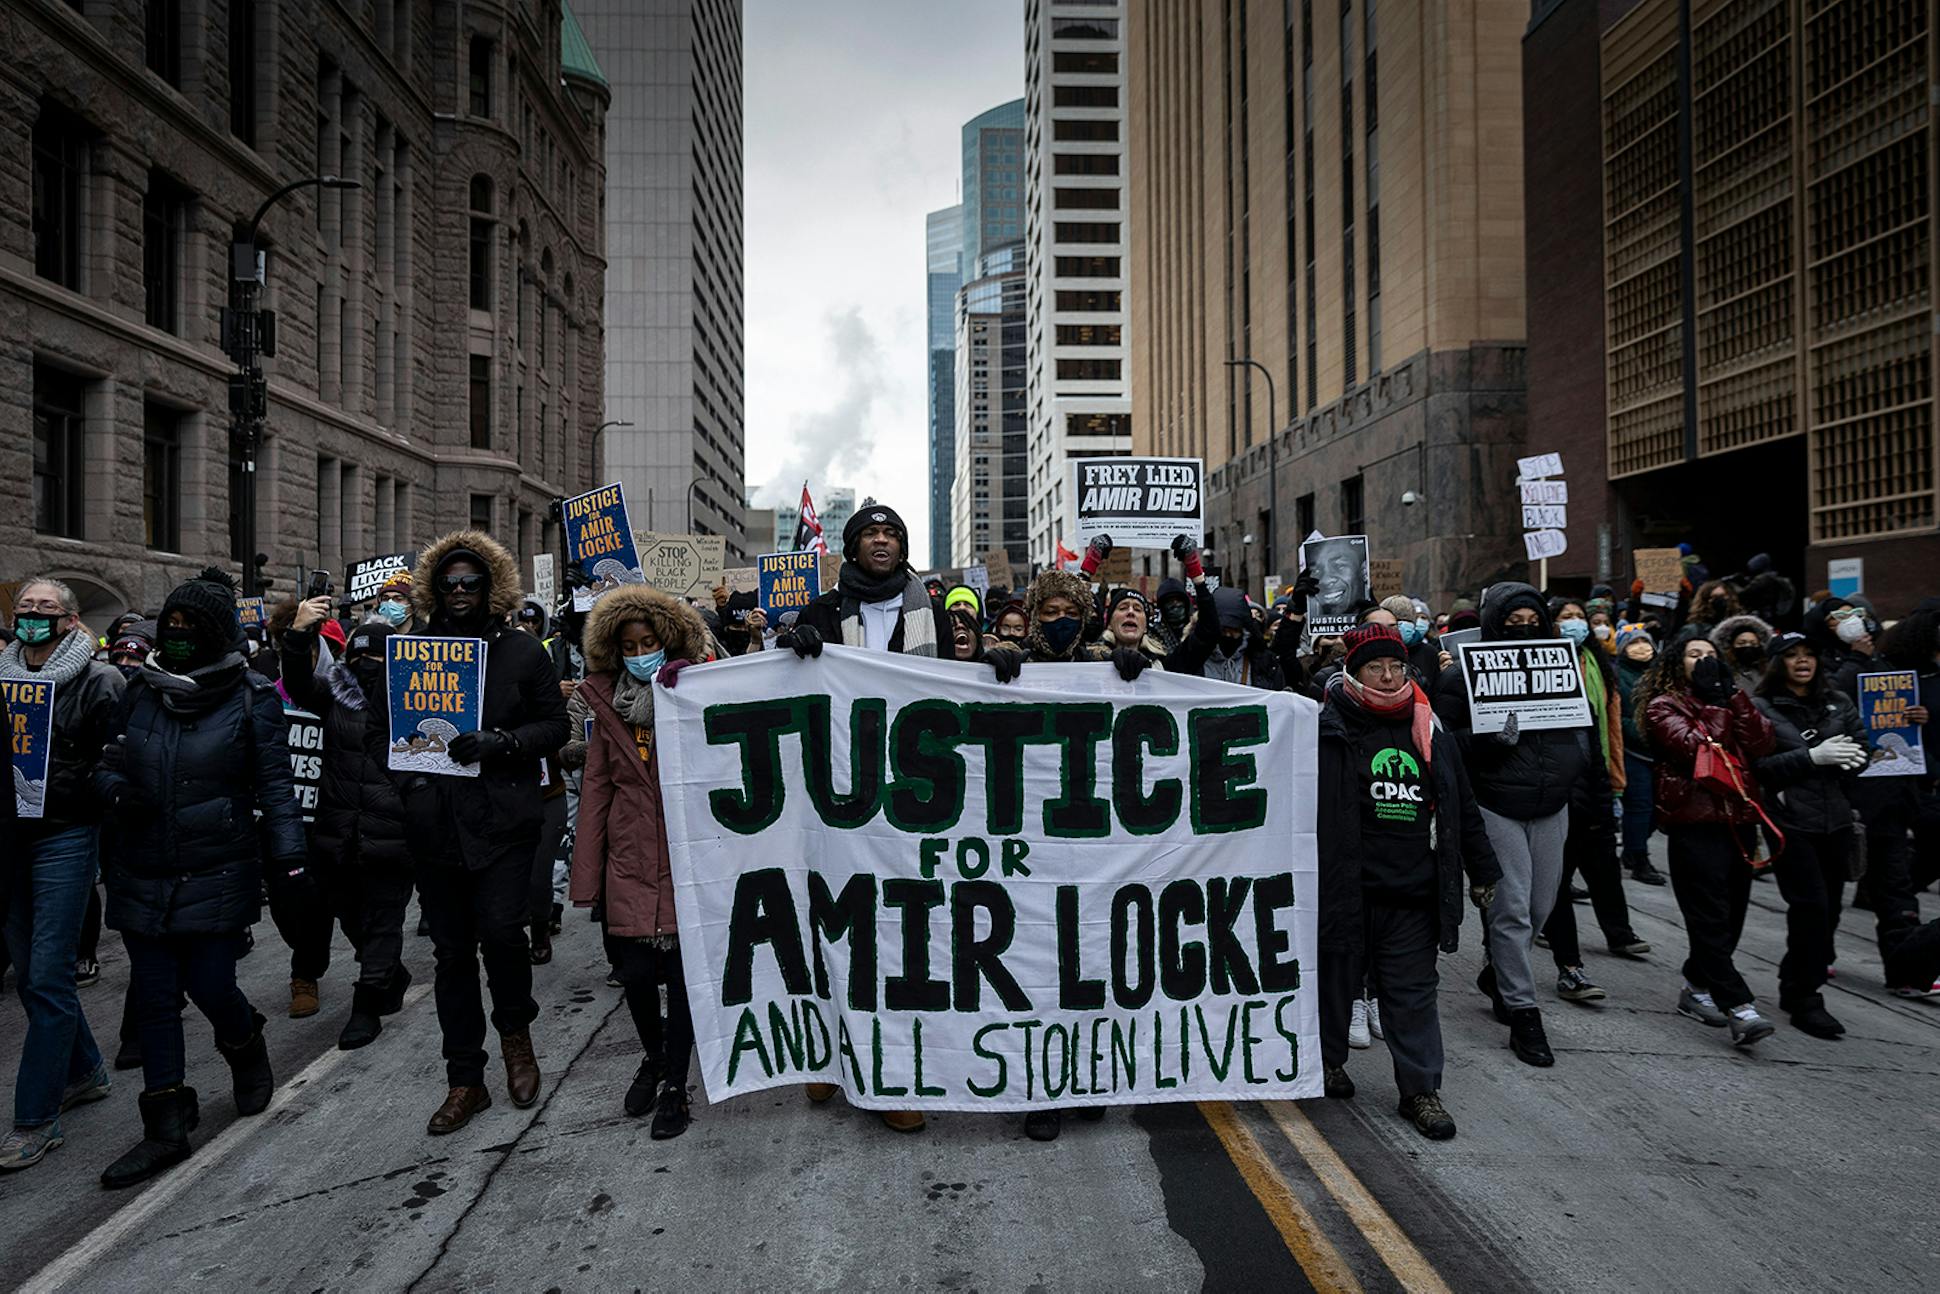 Demonstrators marched in Minneapolis on Feb. 5 to protest the police killing of Amir Locke.